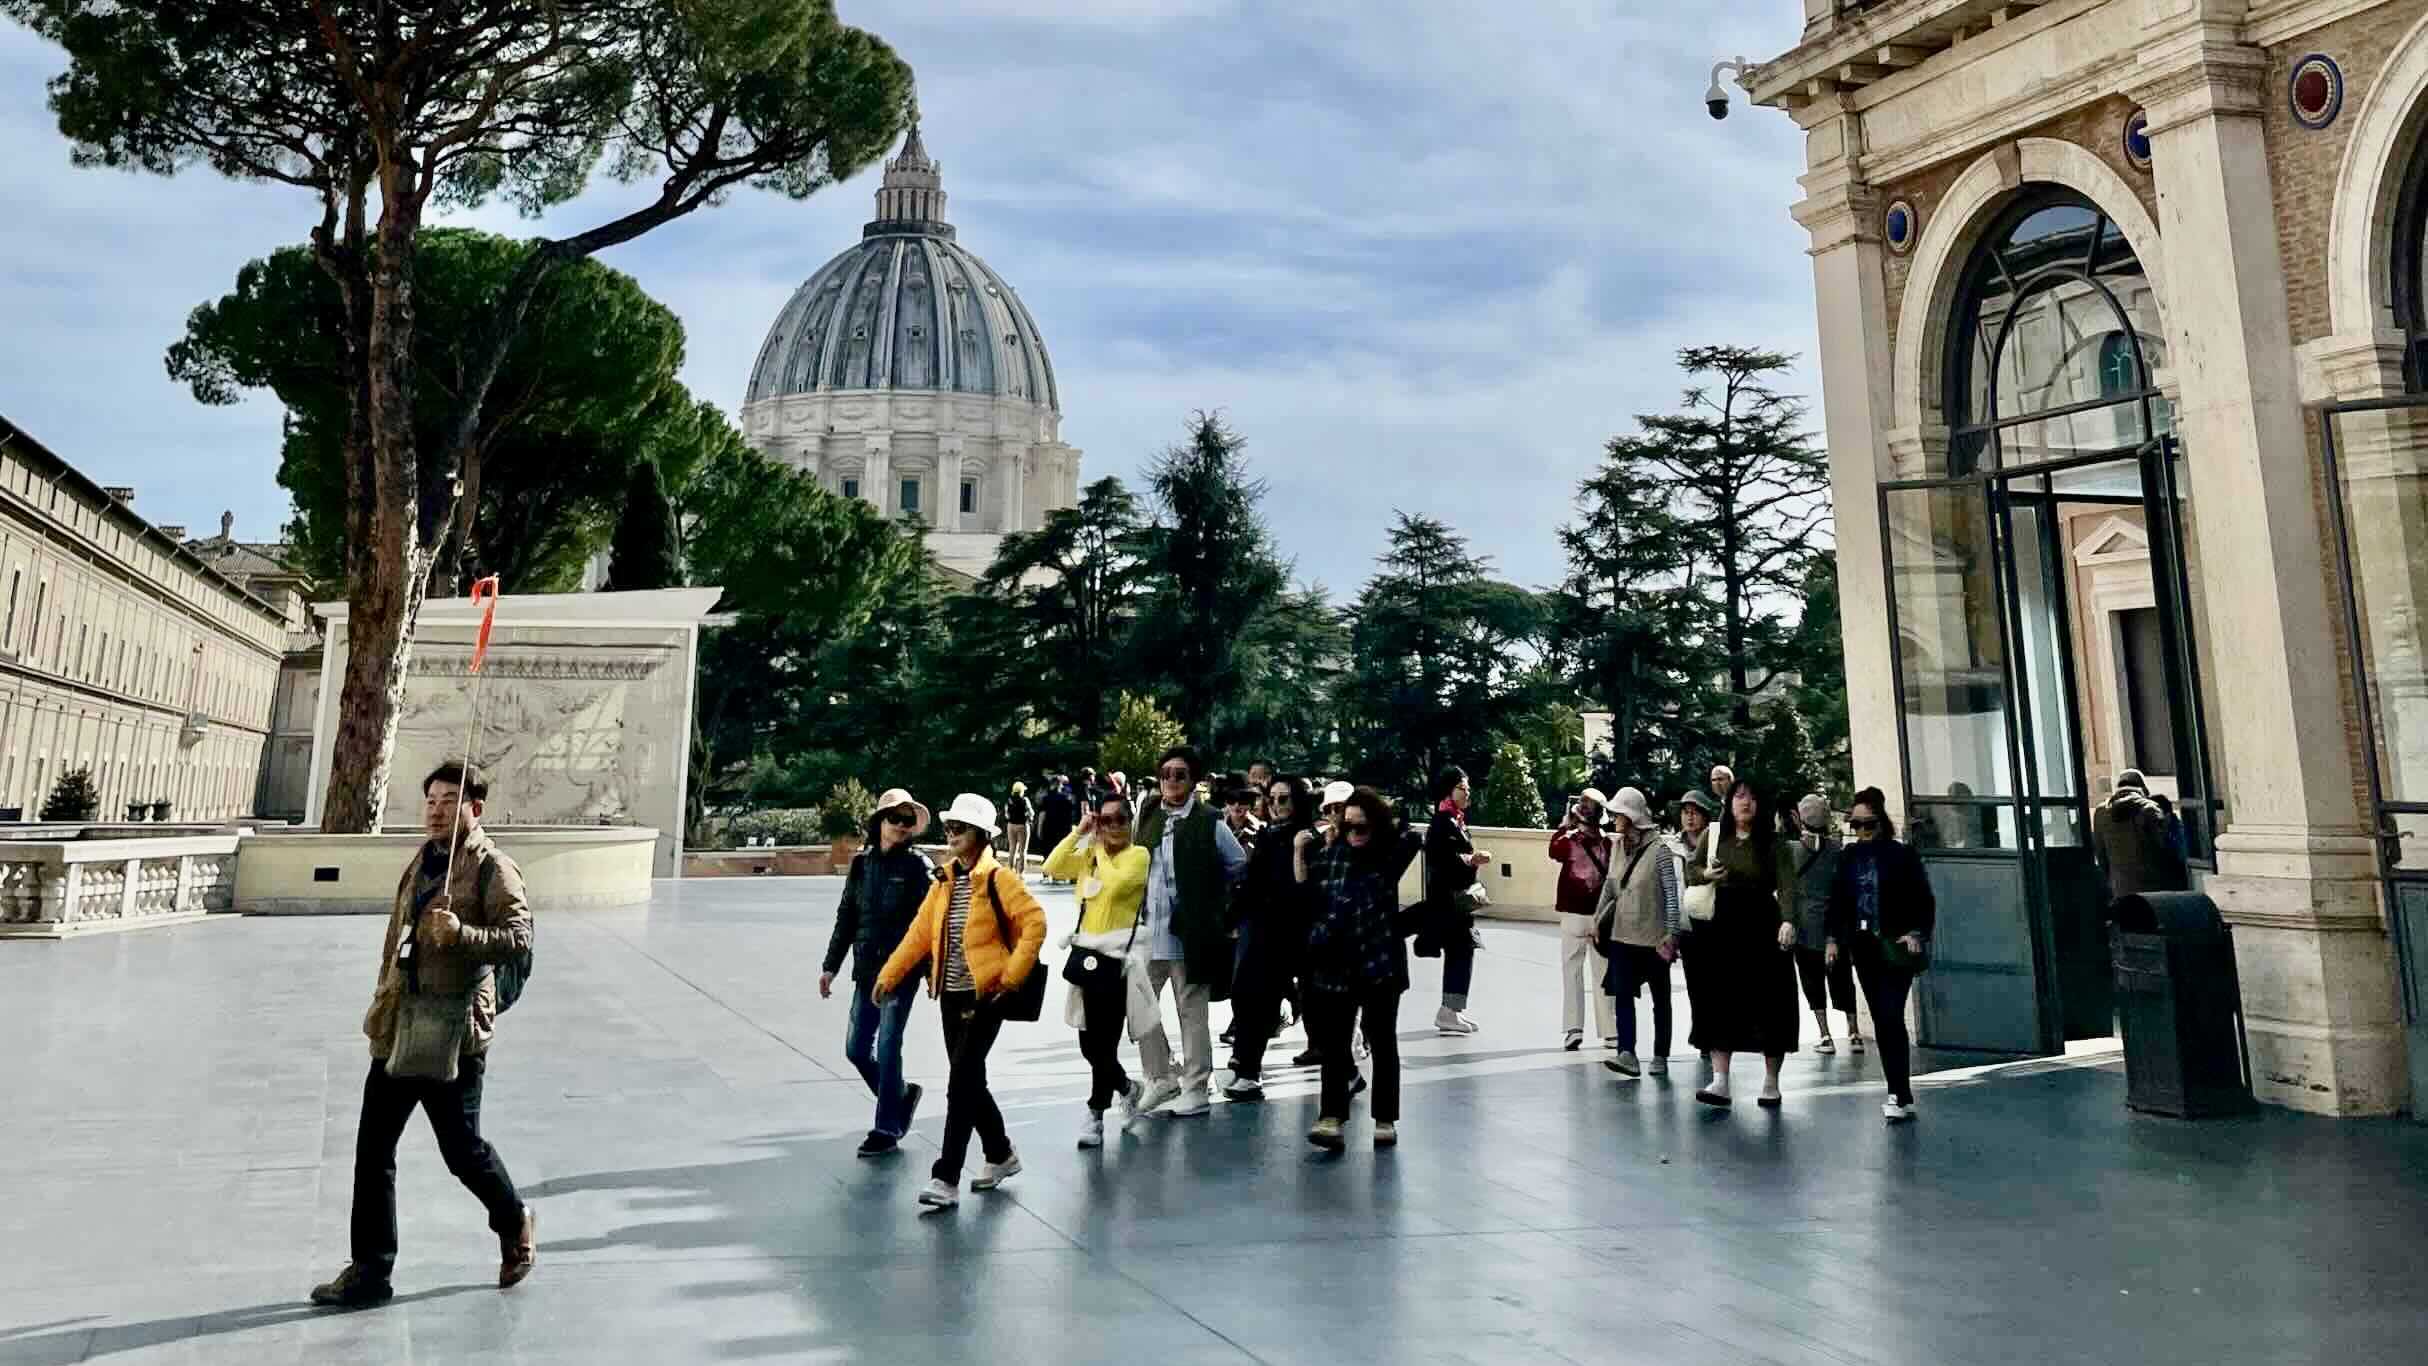 Vatican Museums Tour underway with guide - Photo Charlie Wagner Chazalon